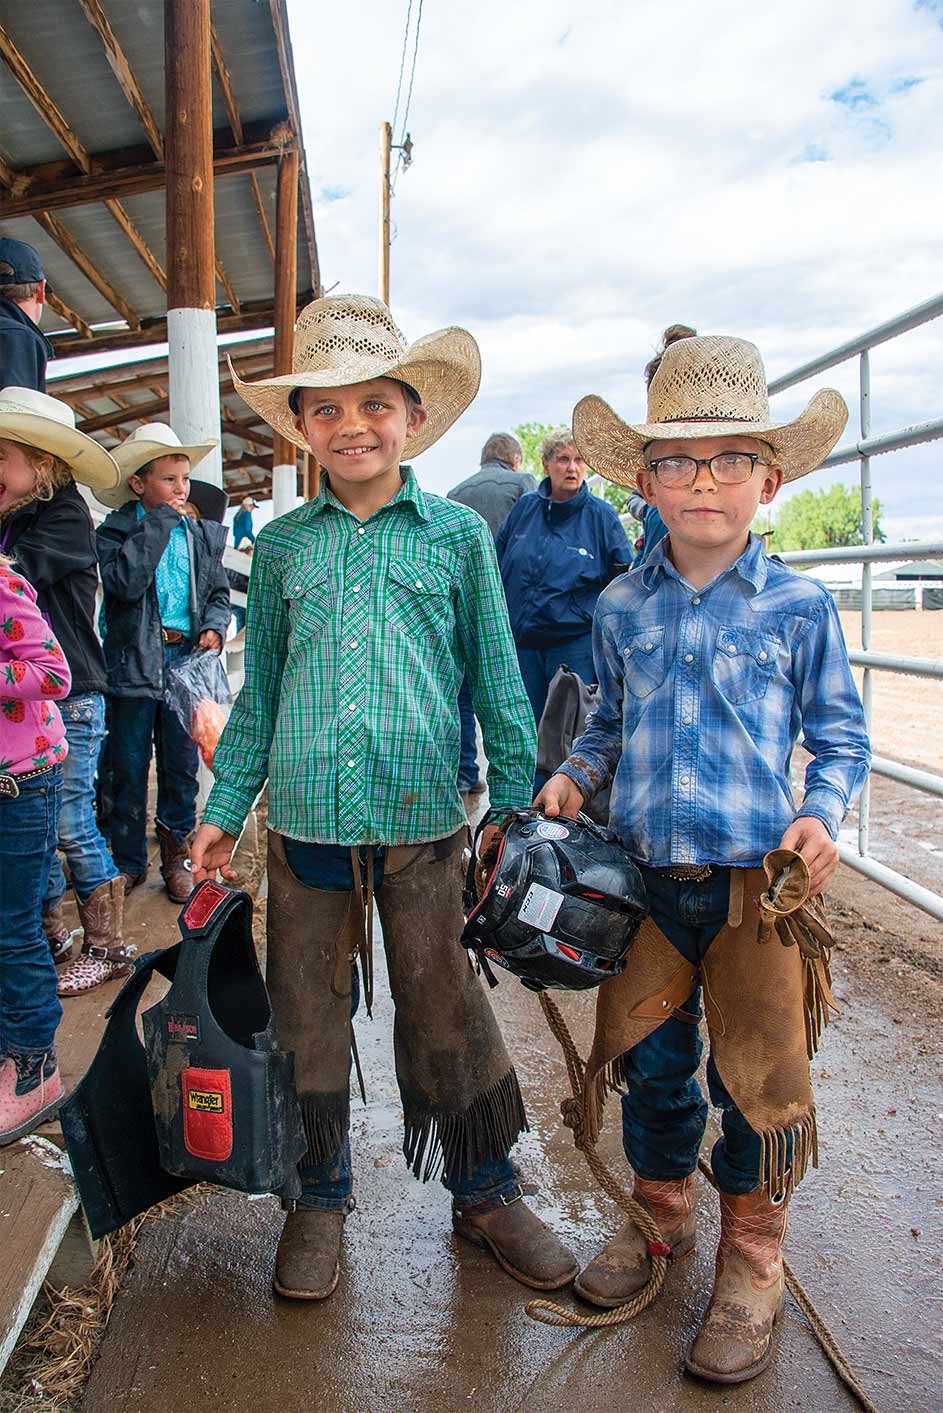 Two young boys dressed for the rodeo